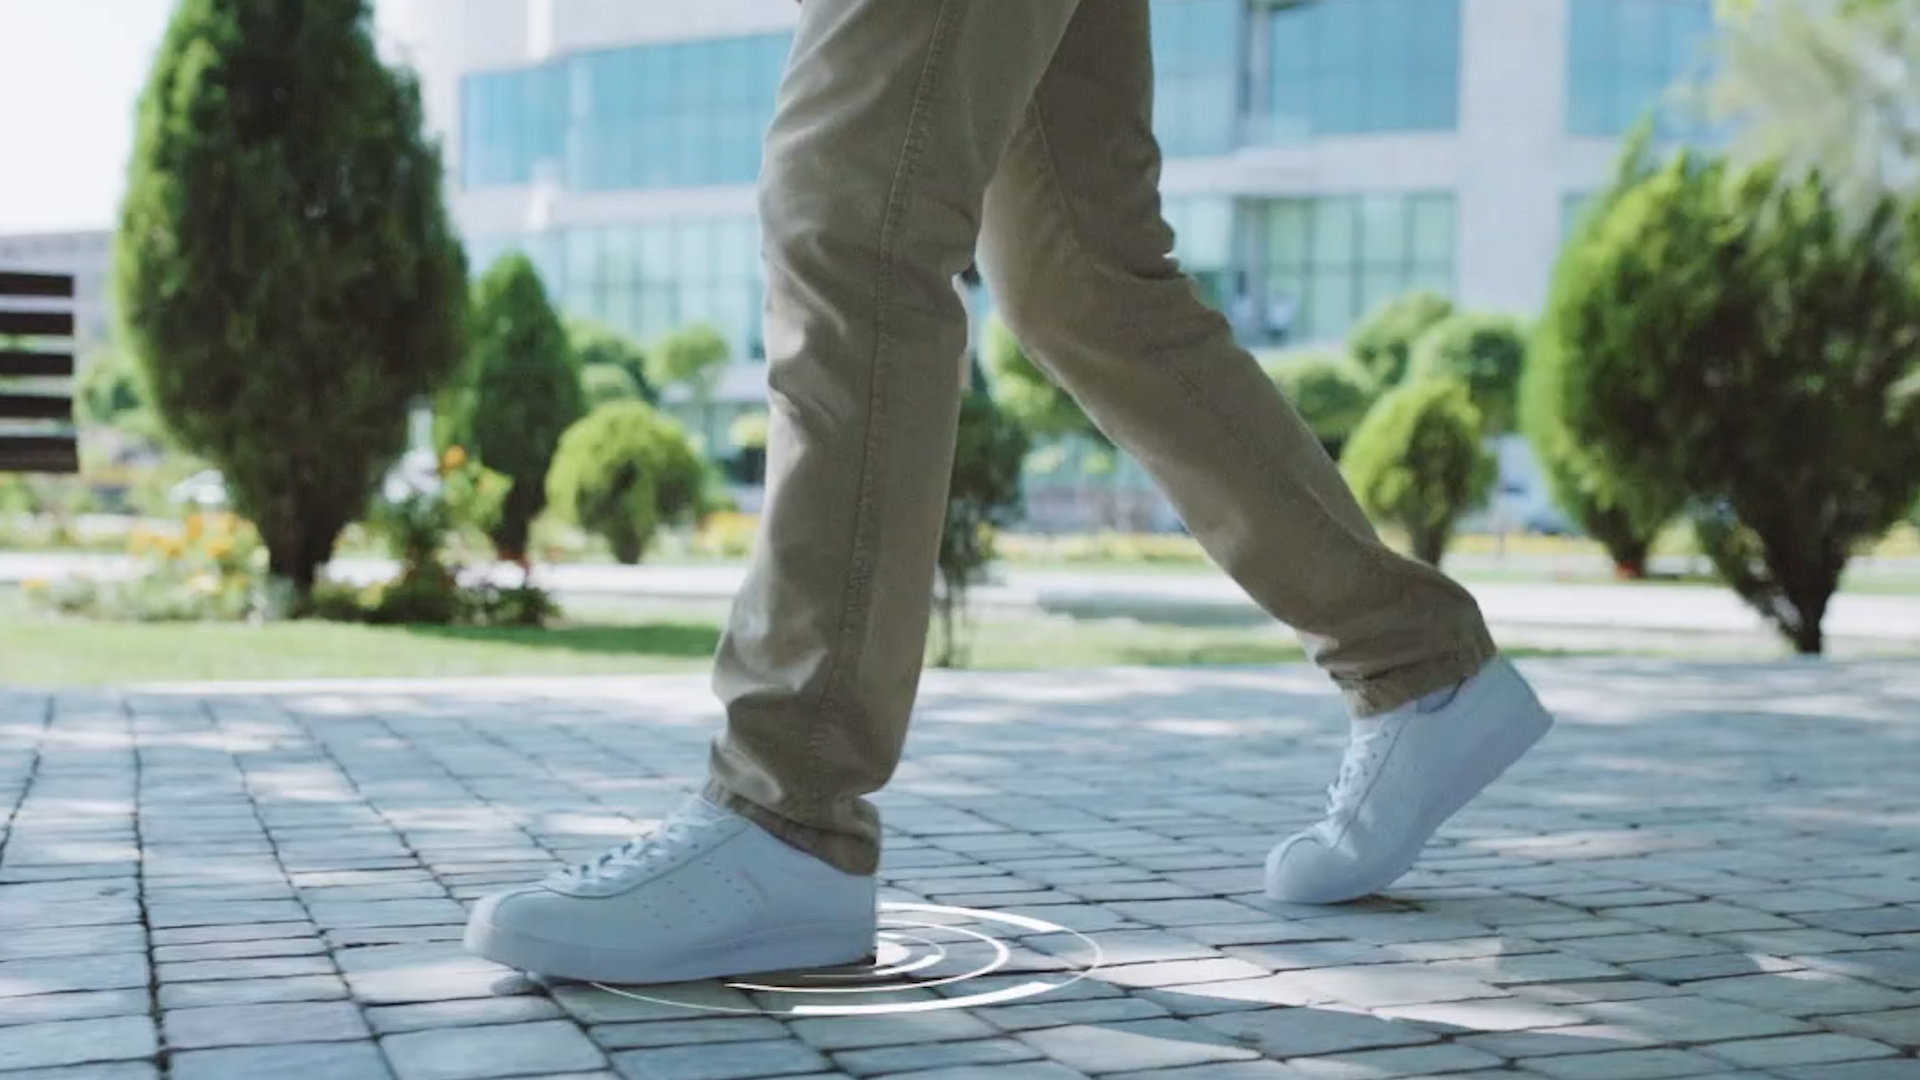 Armenian startup Embry Tech creates a smart insole to make you move and earn money